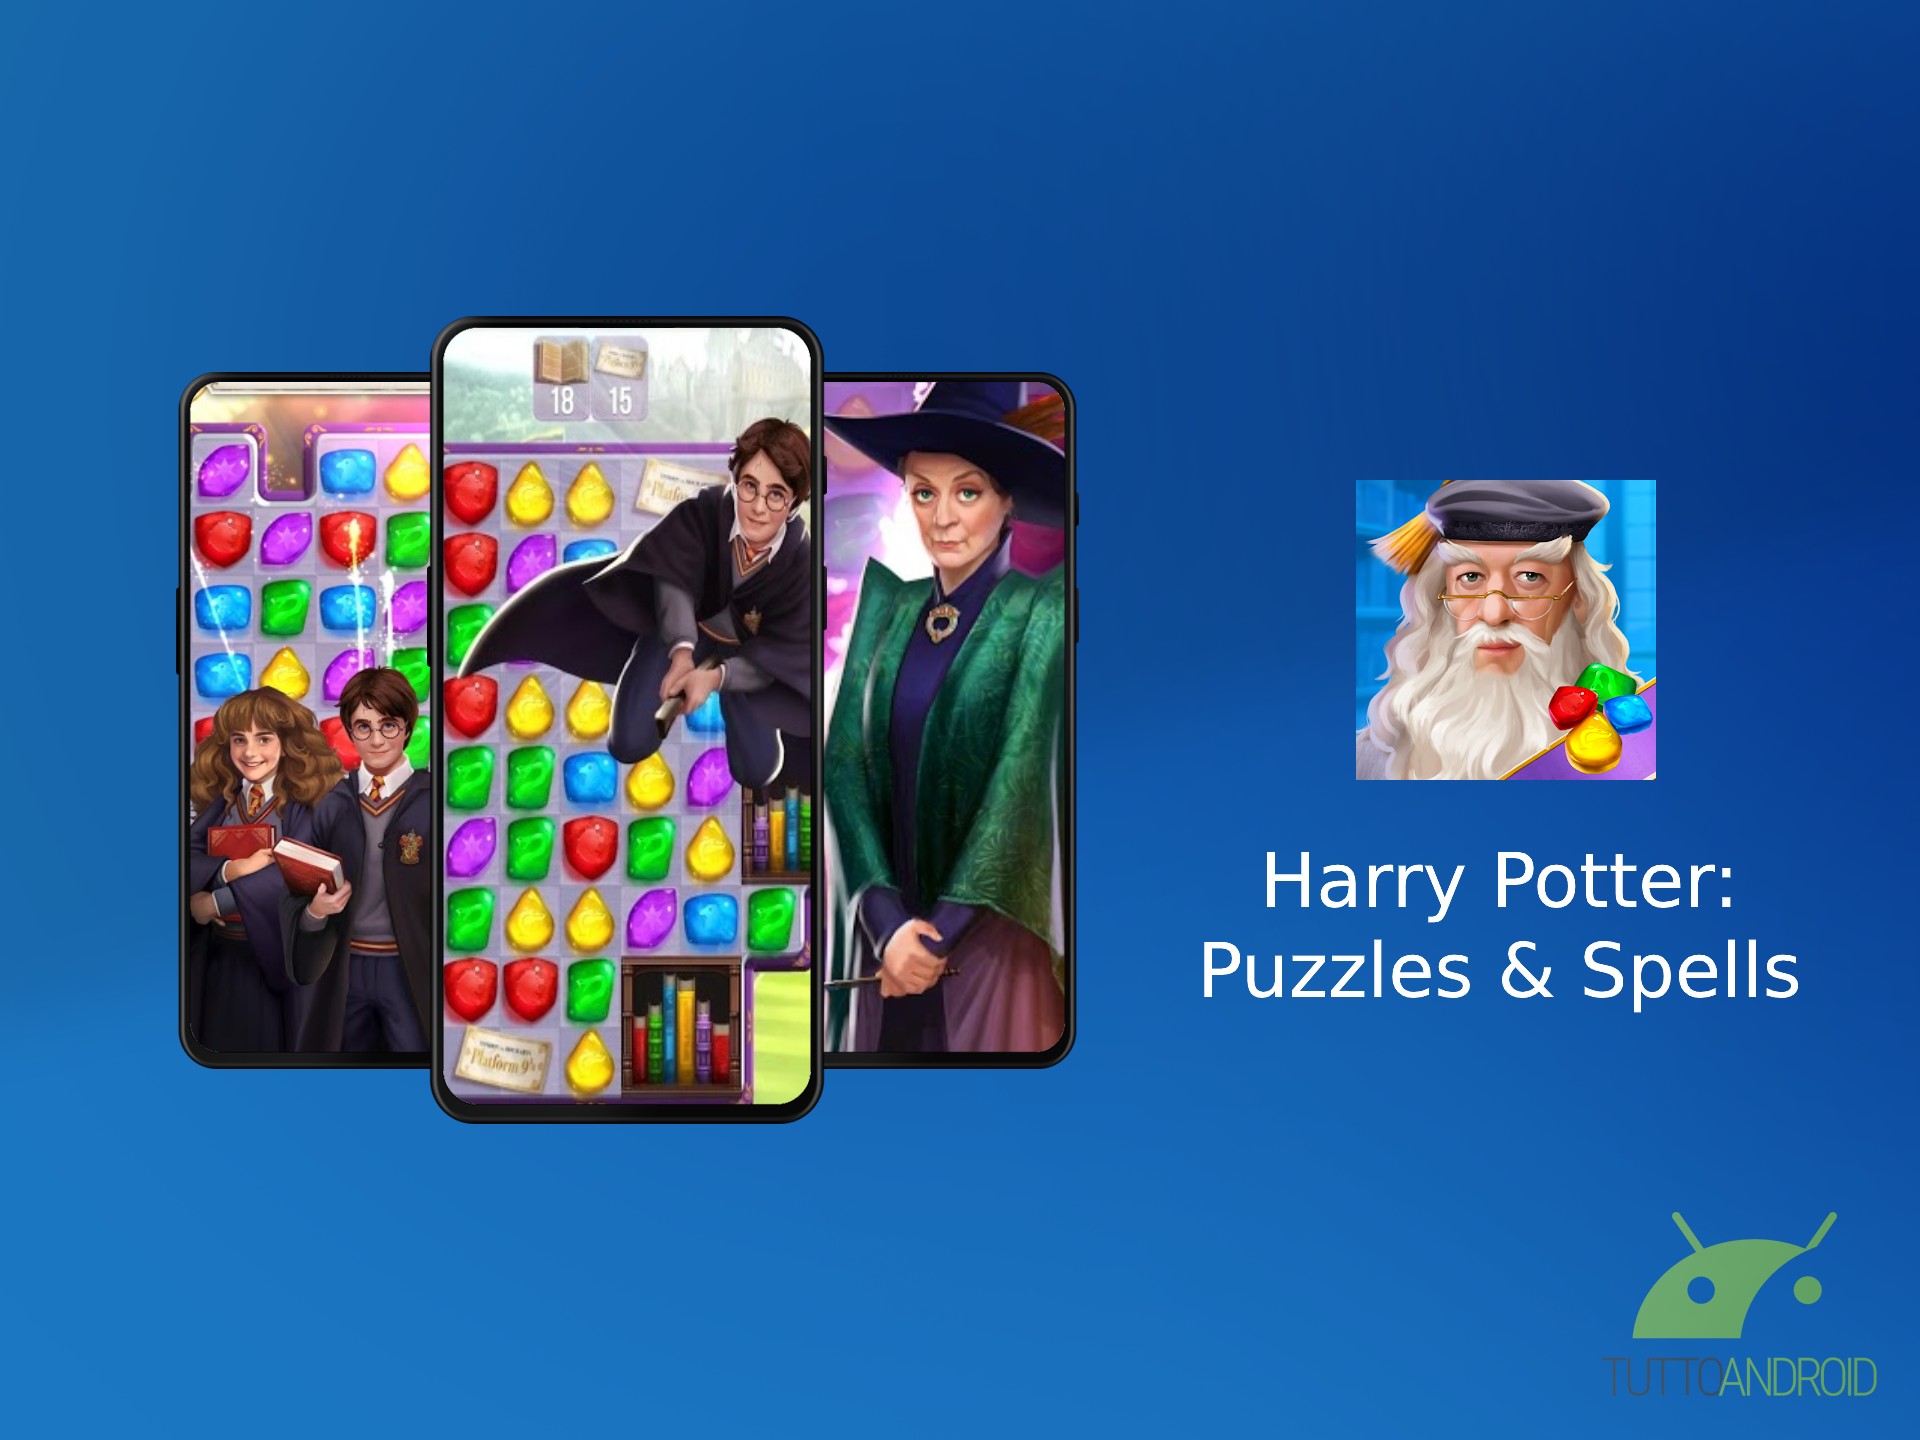 harry potter puzzles and spells unlimited money